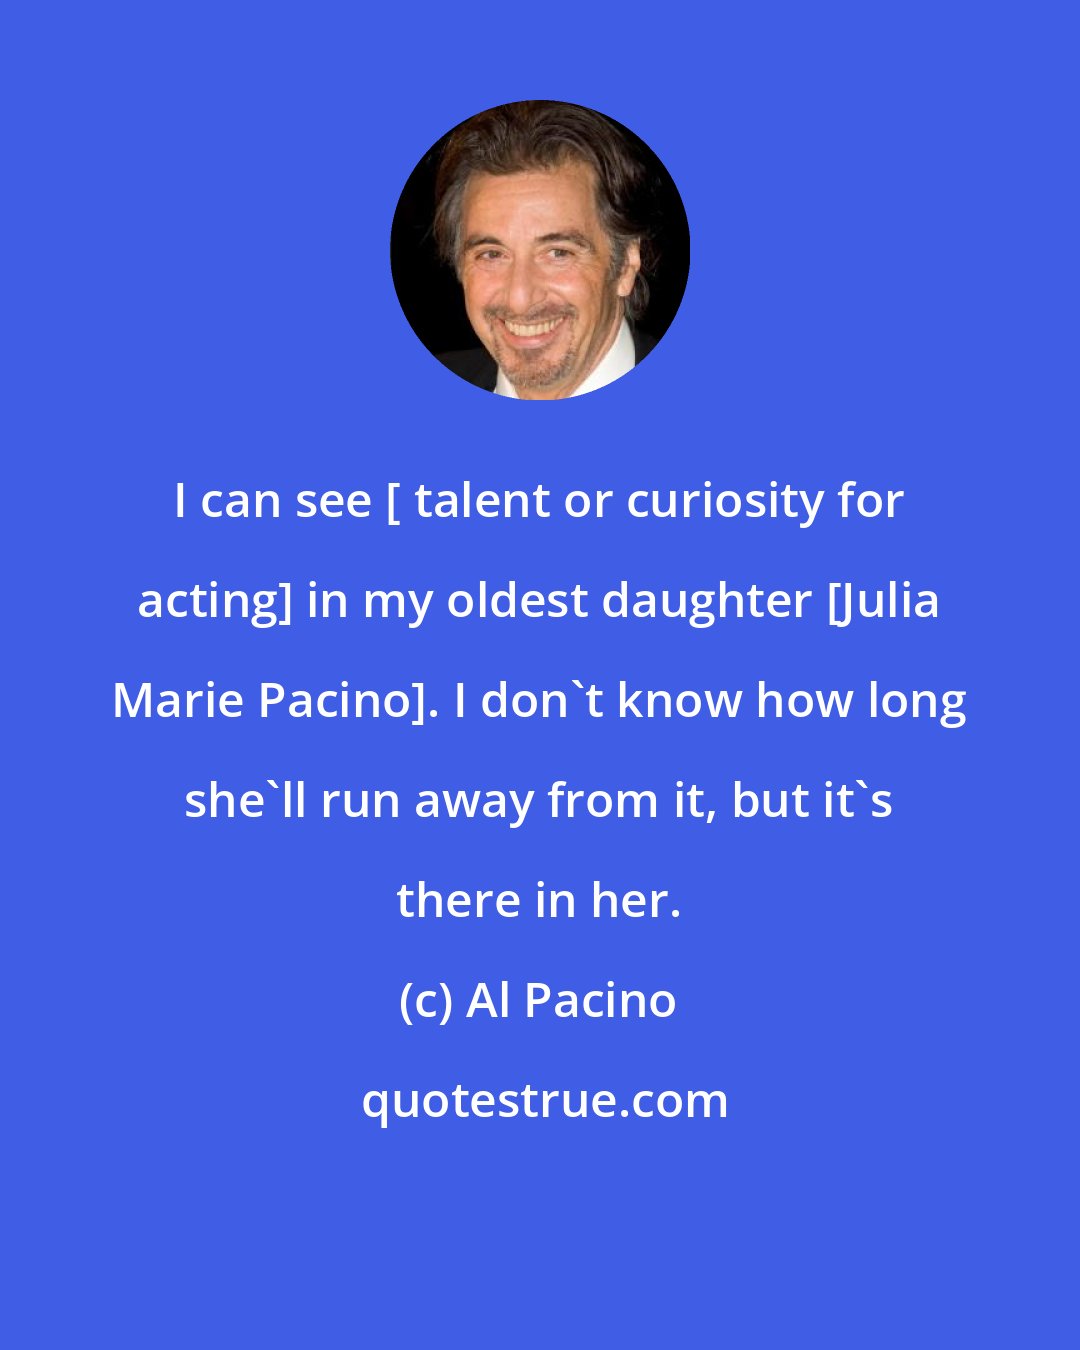 Al Pacino: I can see [ talent or curiosity for acting] in my oldest daughter [Julia Marie Pacino]. I don't know how long she'll run away from it, but it's there in her.